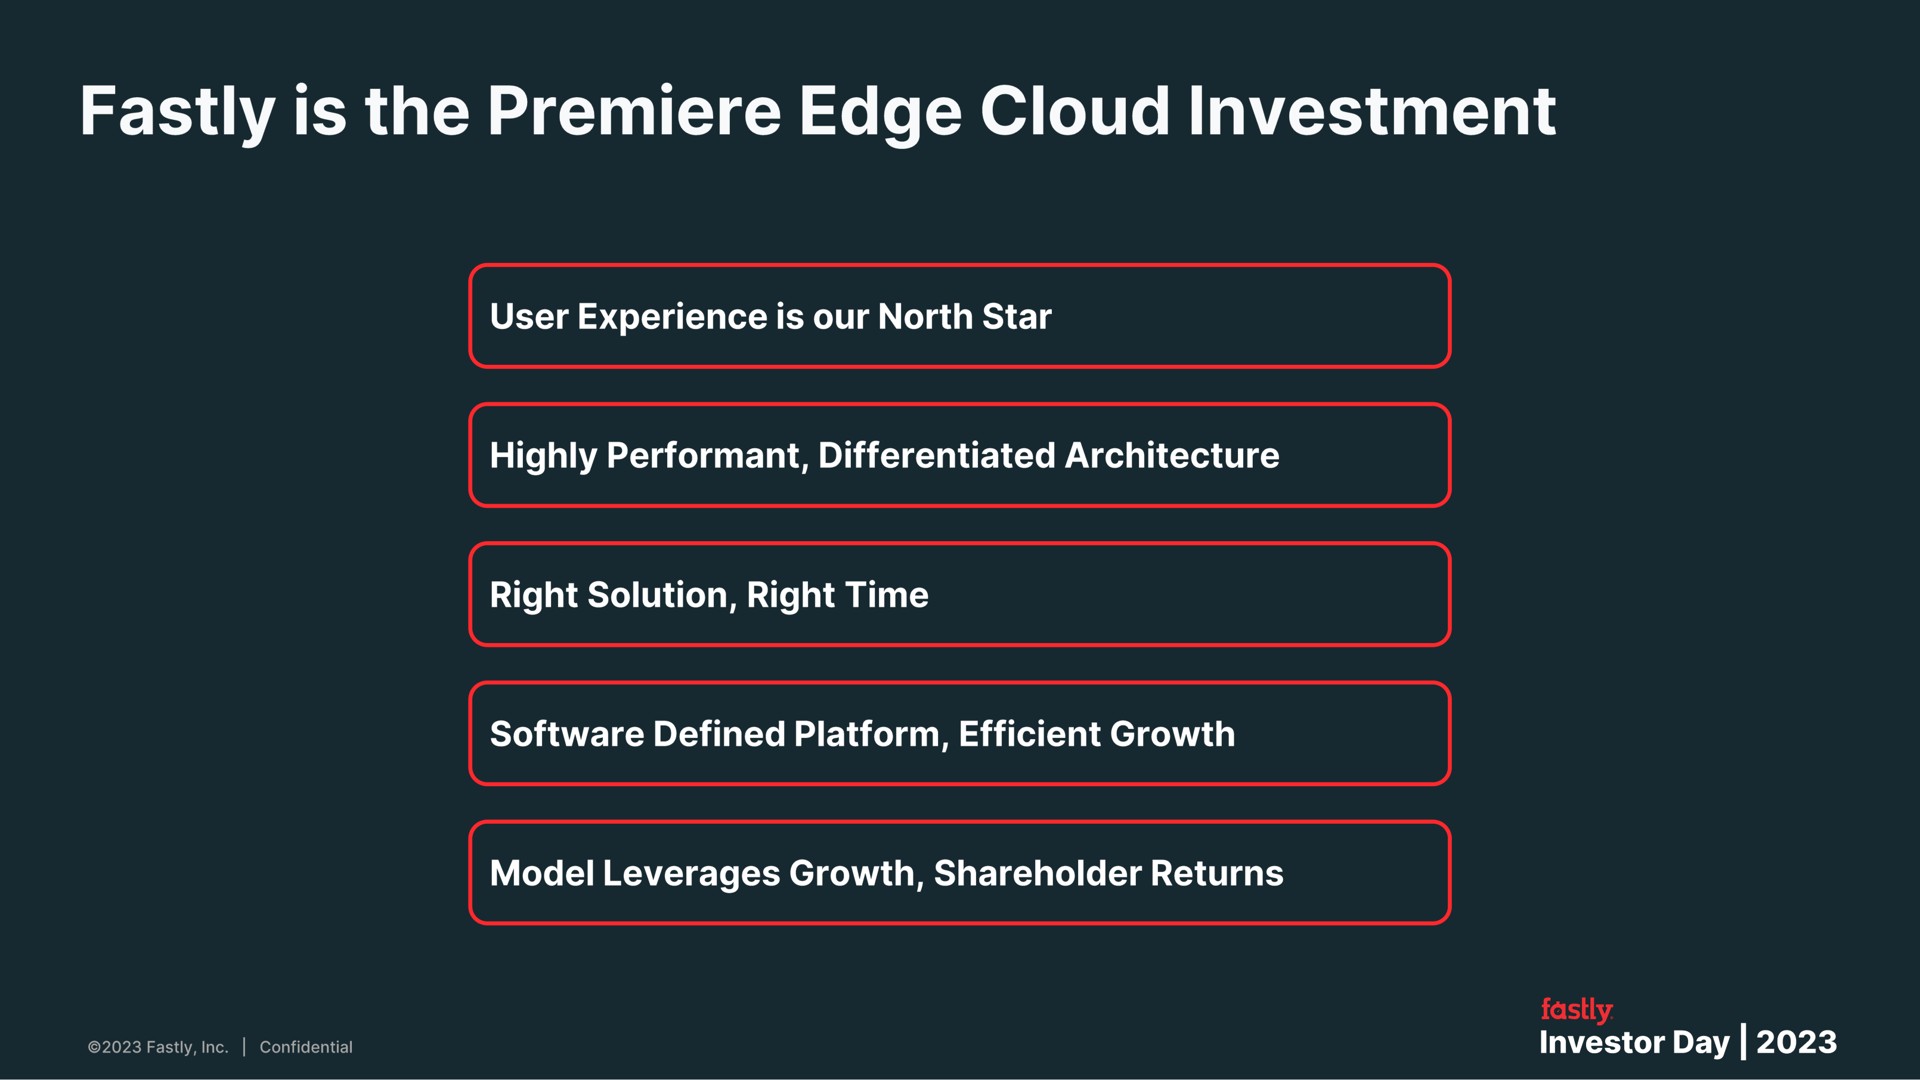 is the premiere edge cloud investment | Fastly